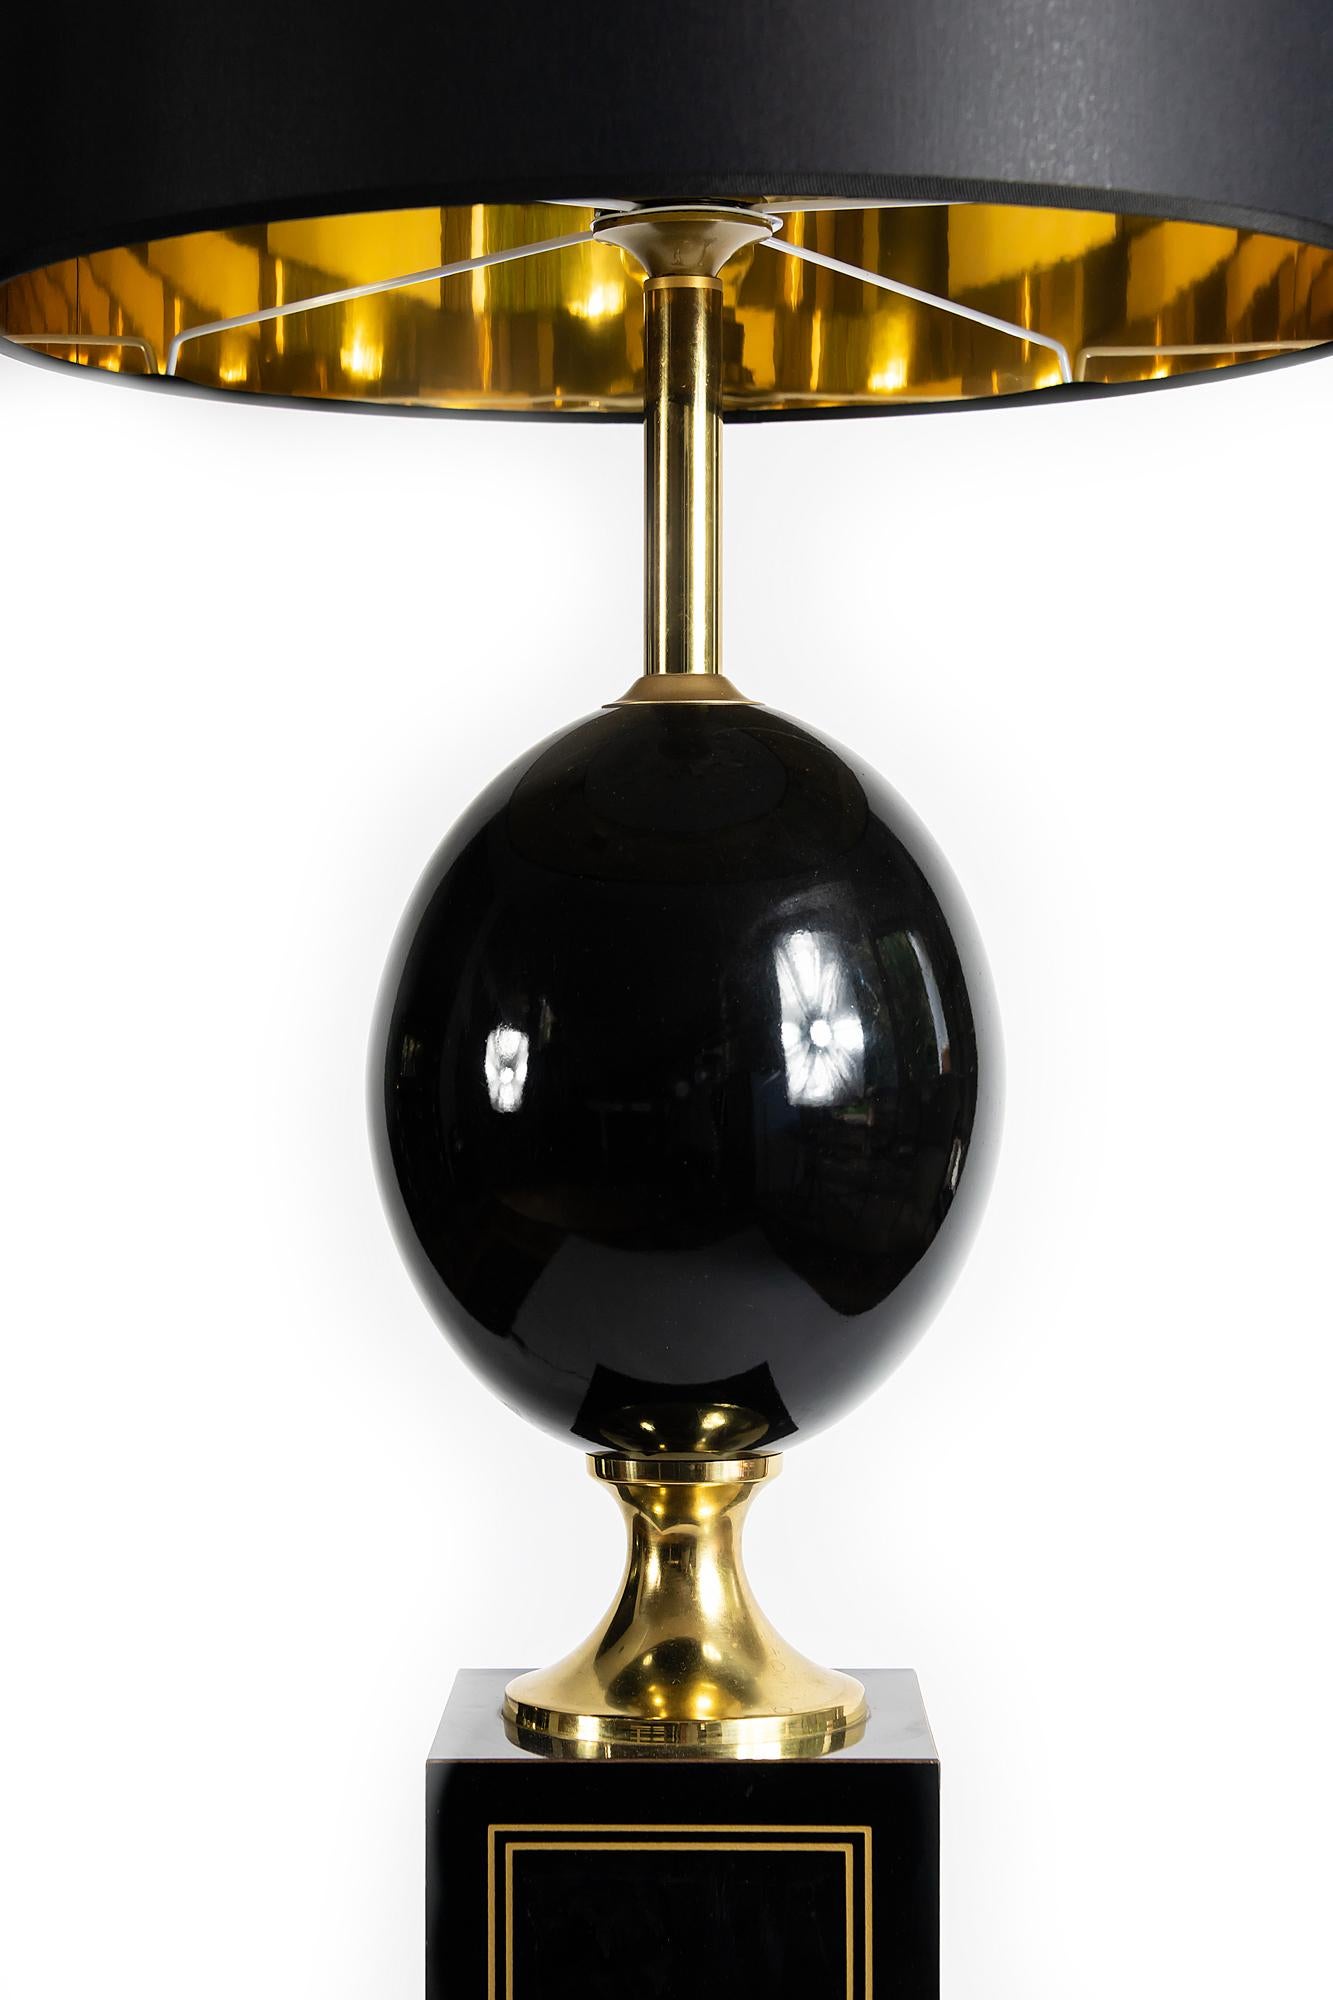 Midcentury French lamp by Maison Le Dauphin designed in rectangular base and glazed ceramic central piece. The lamp is with new made satin finish black color textile shade with gold inside.
Dimensions: High 131 cm (incl. shade), shade high 24 cm